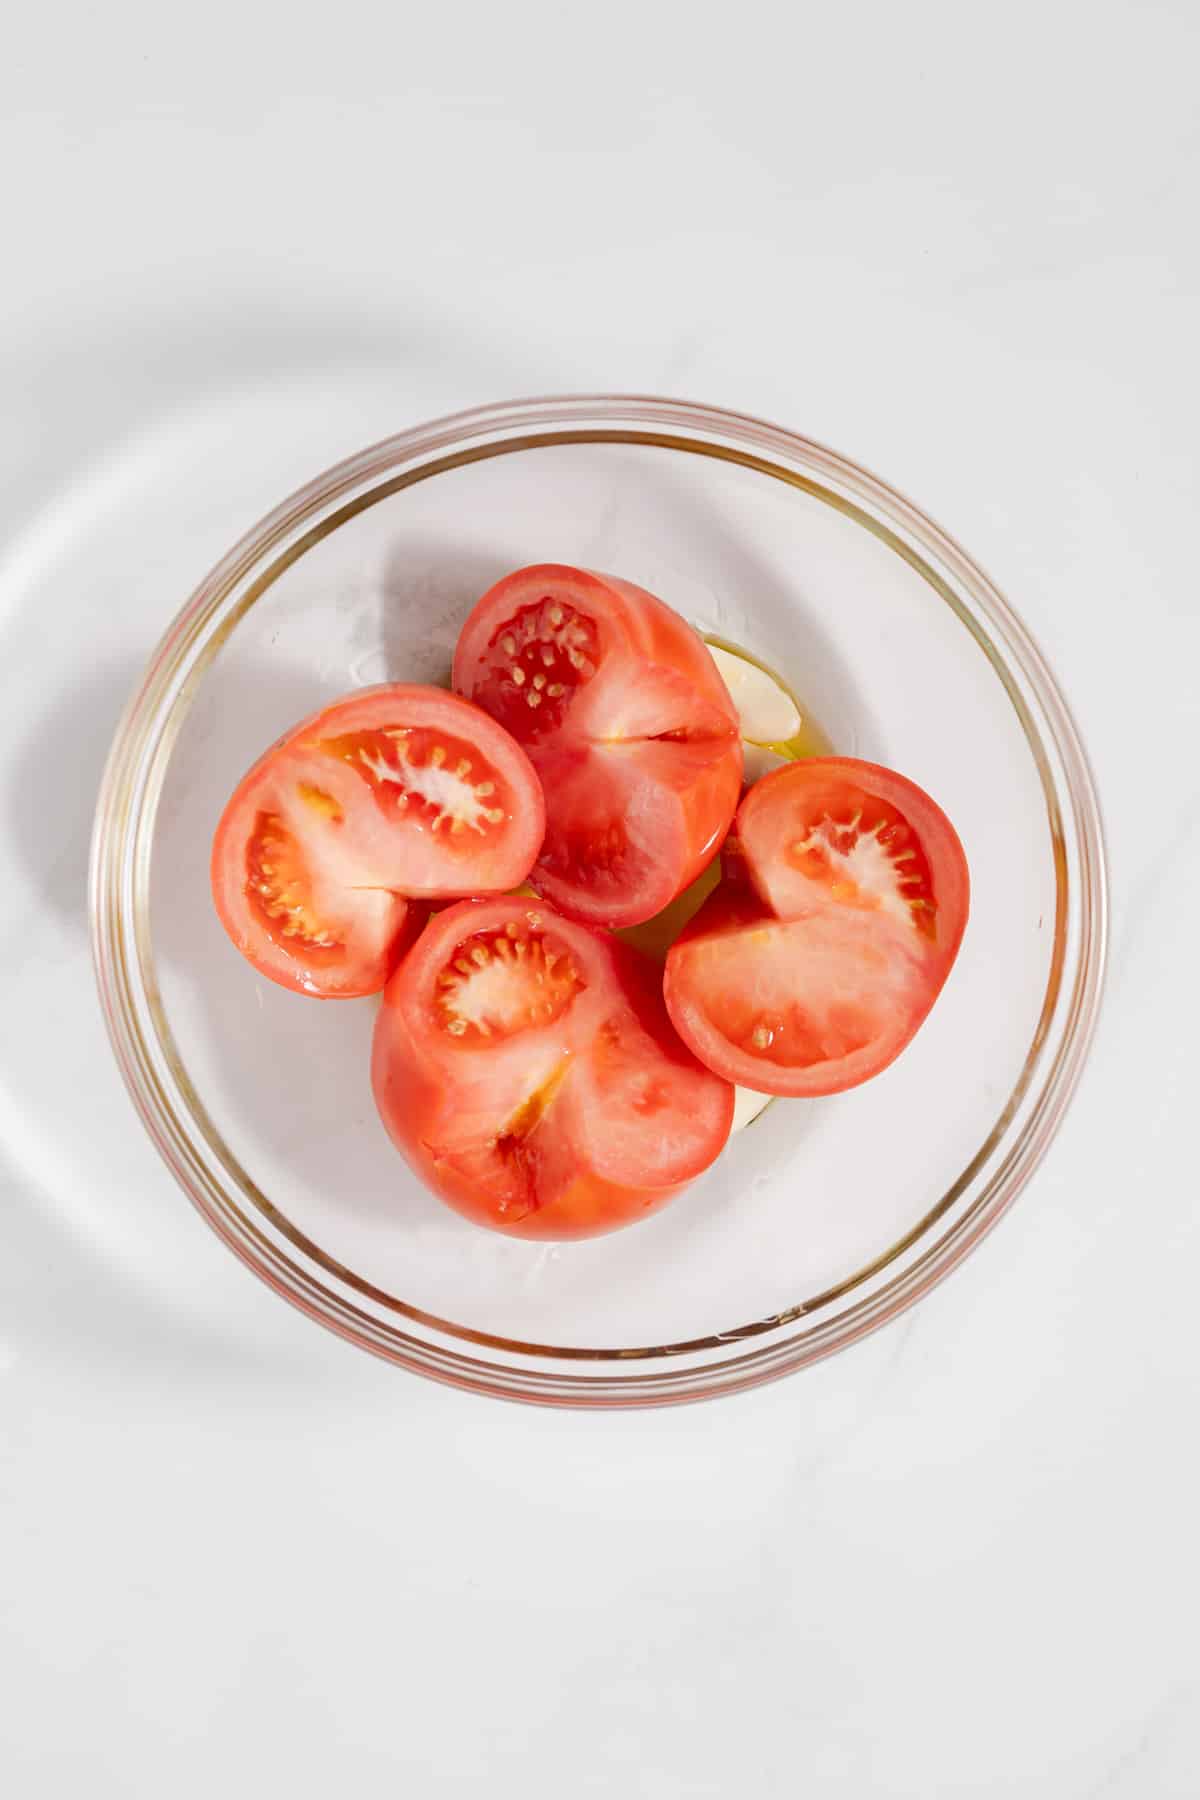 Tomatoes and garlic in glass bowl.